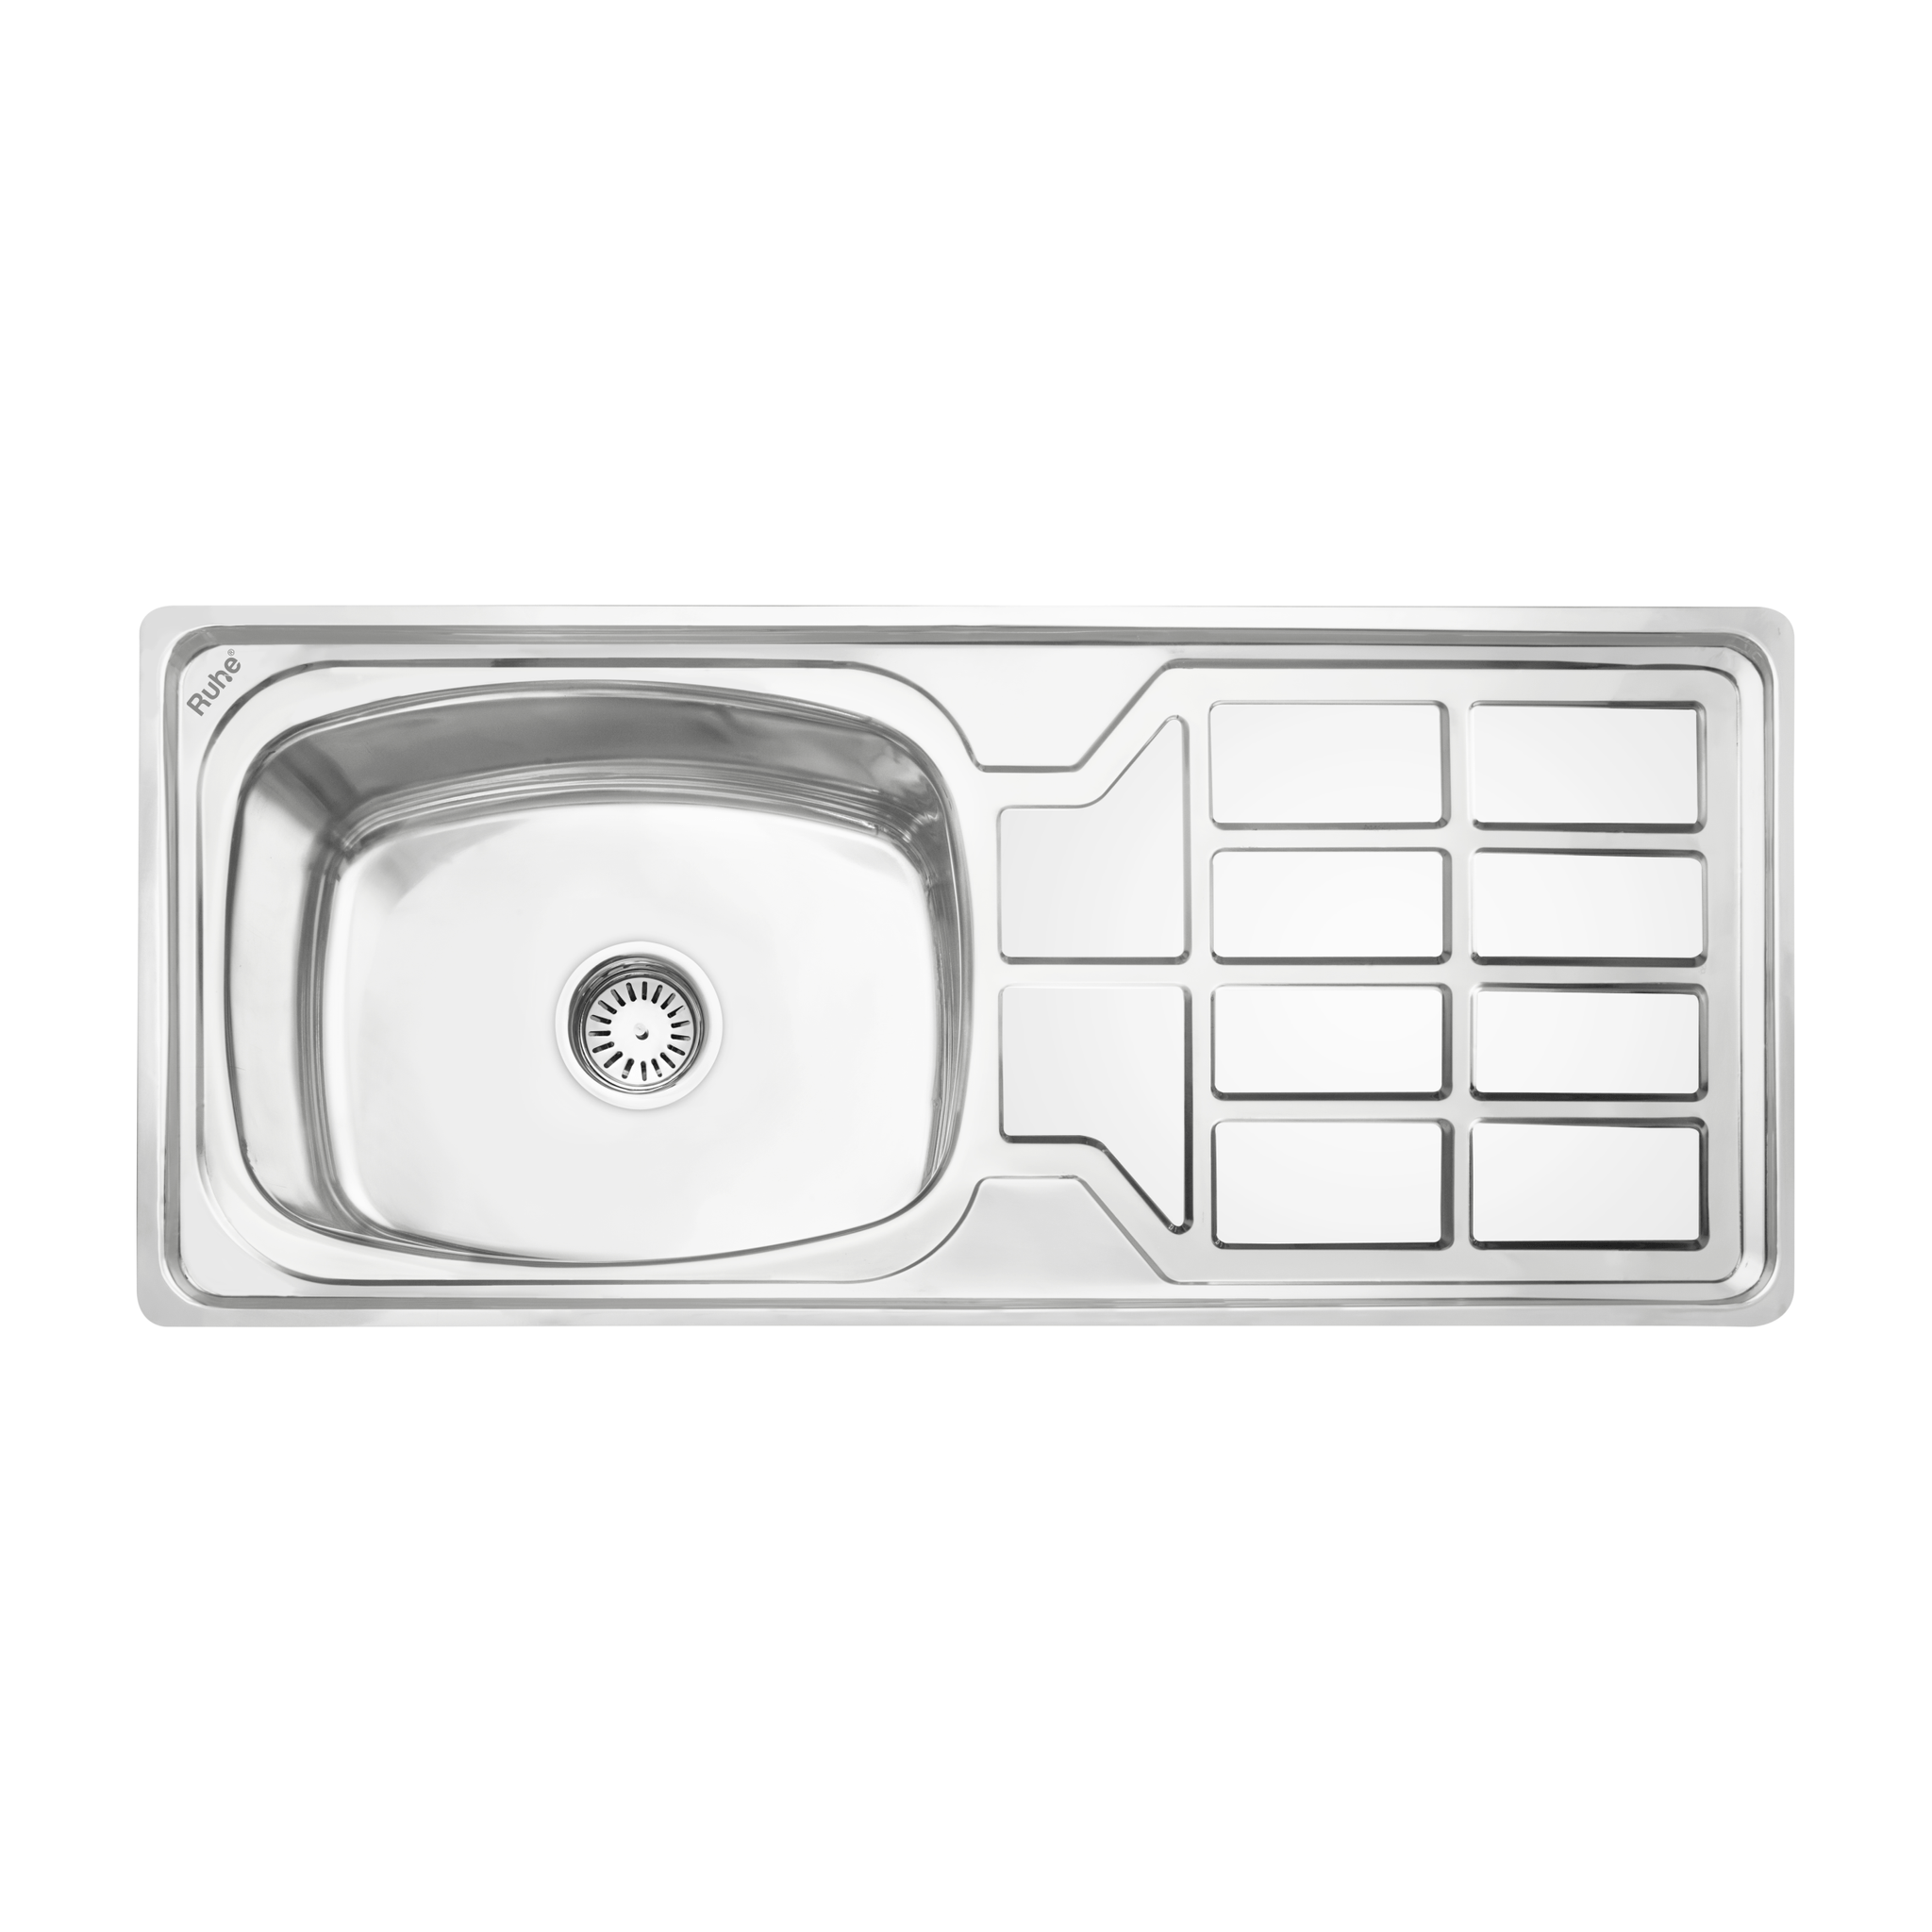 Oval Single Bowl (45 x 20 x 9 inches) Kitchen Sink with Drainboard - by Ruhe®